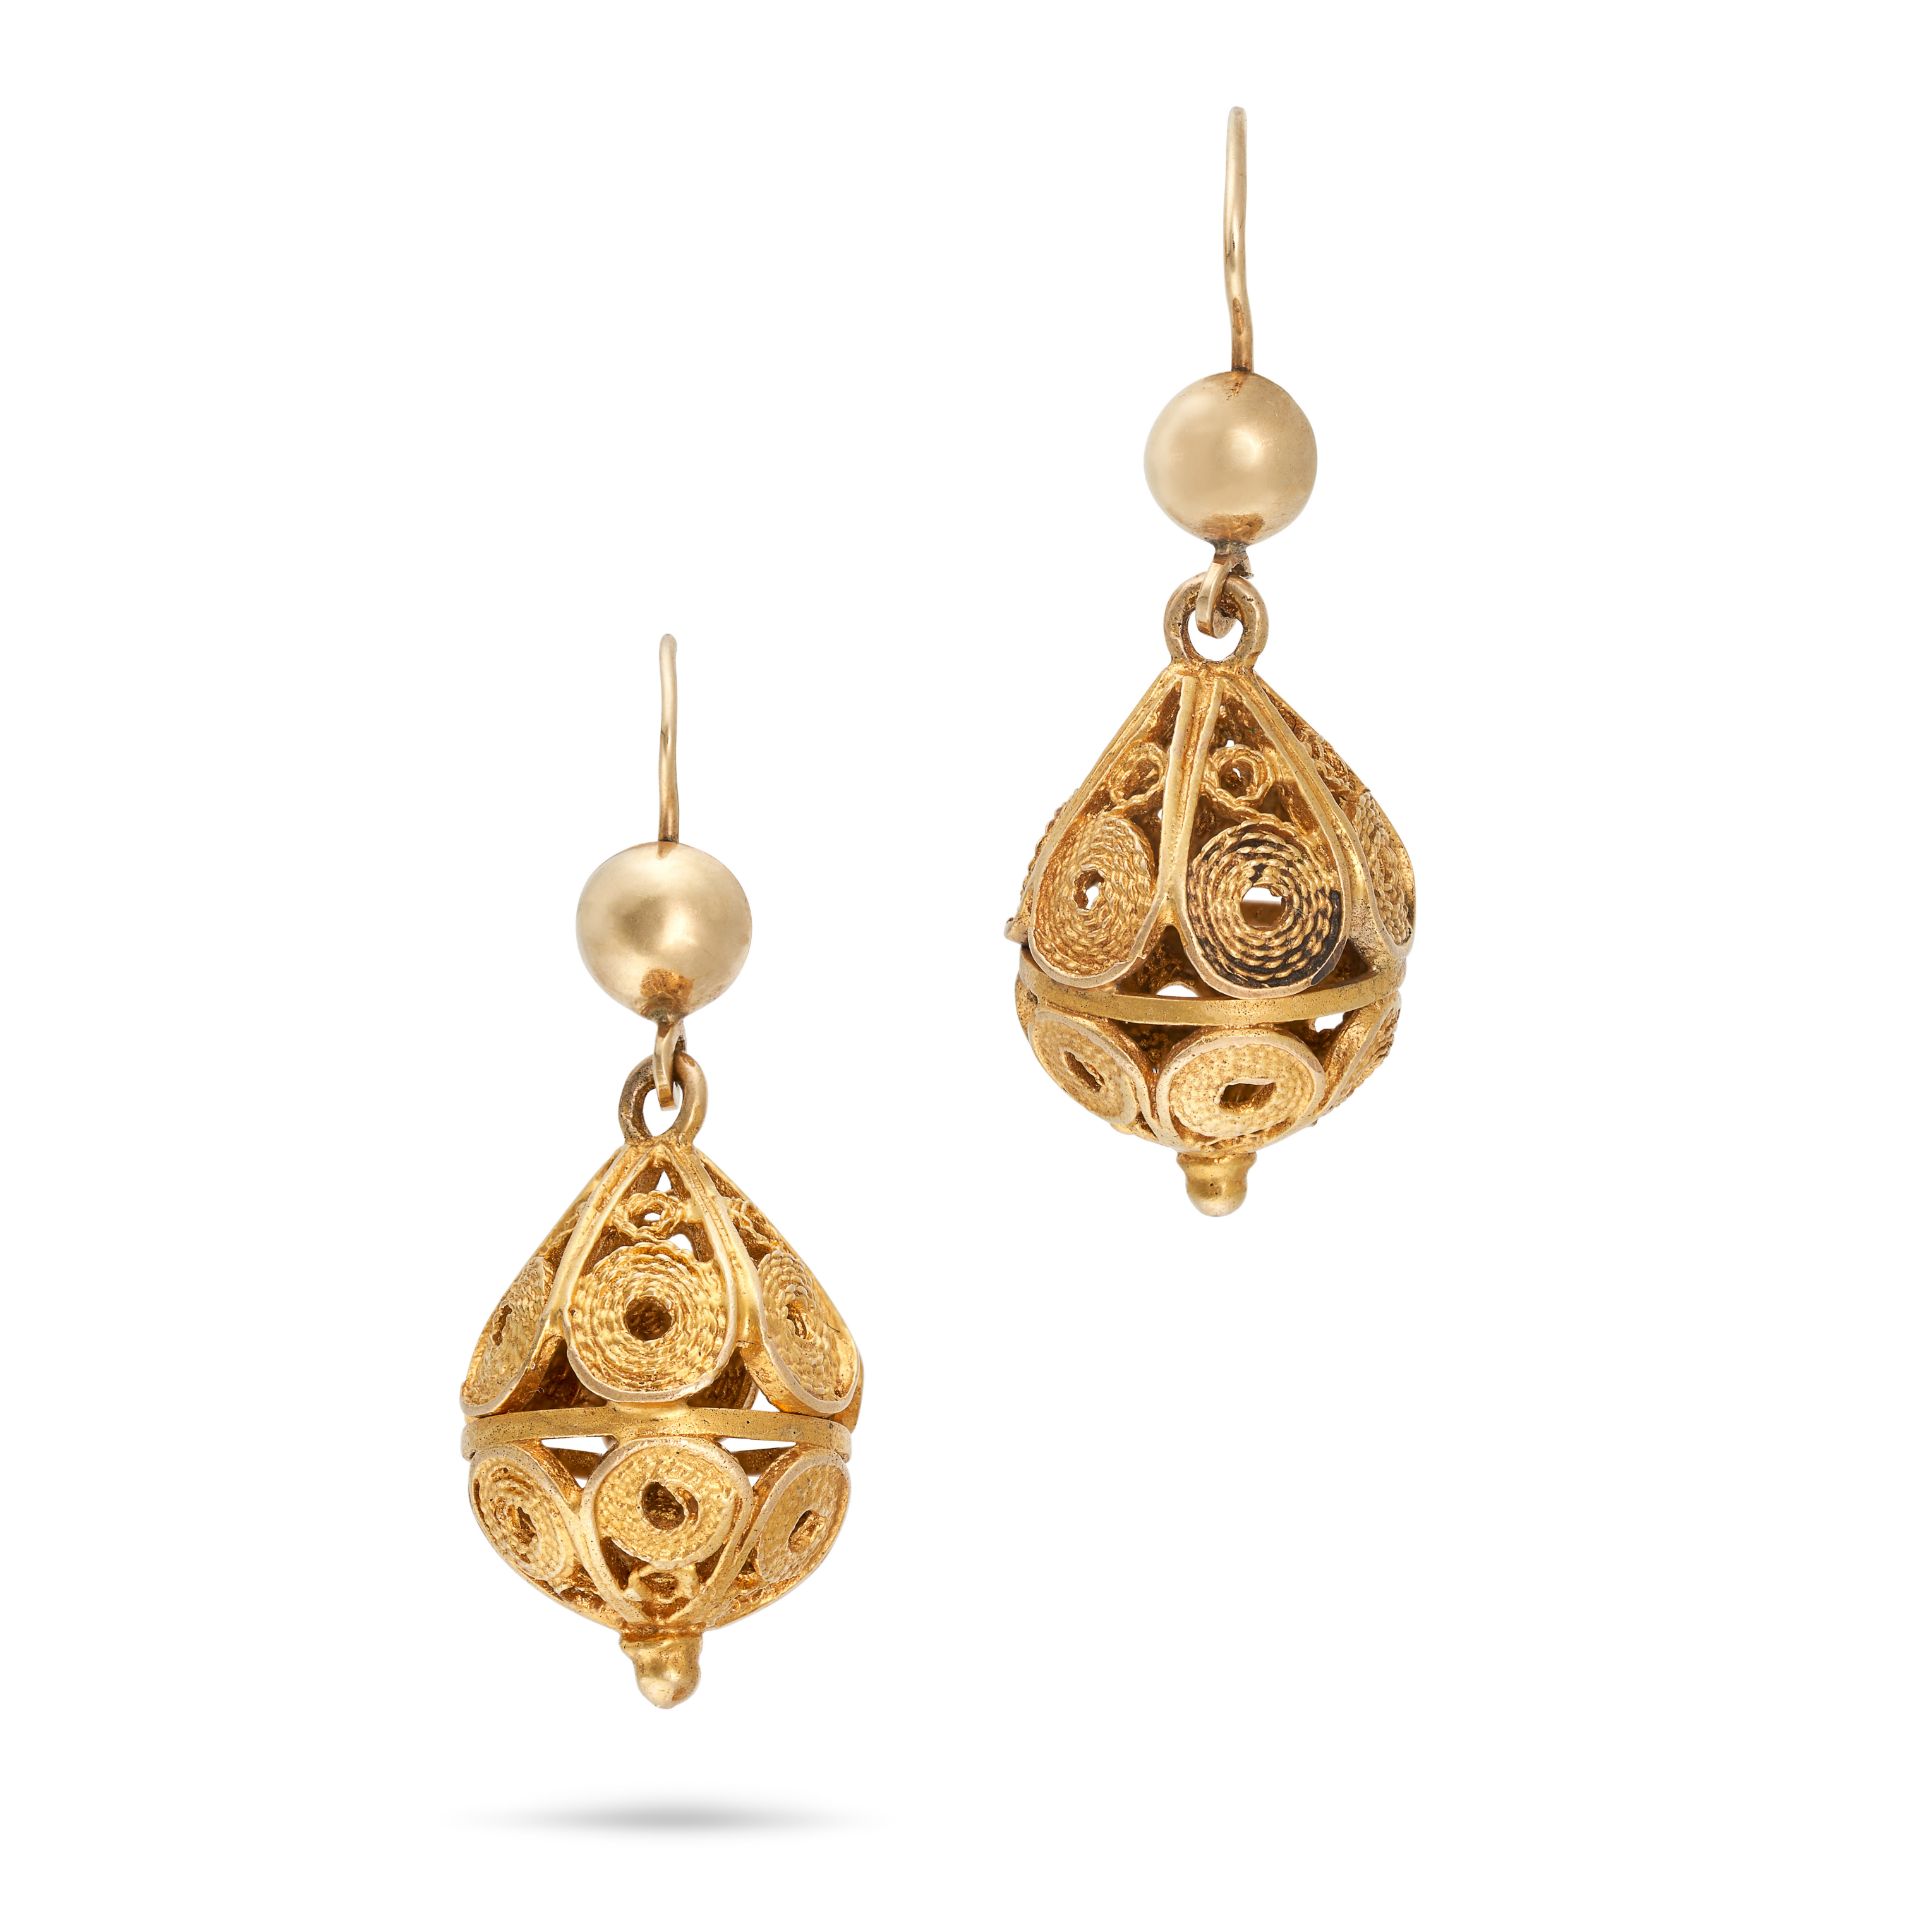 A PAIR OF ANTIQUE VICTORIAN EARRINGS in yellow gold, each earring in an ornate filigree design, n...